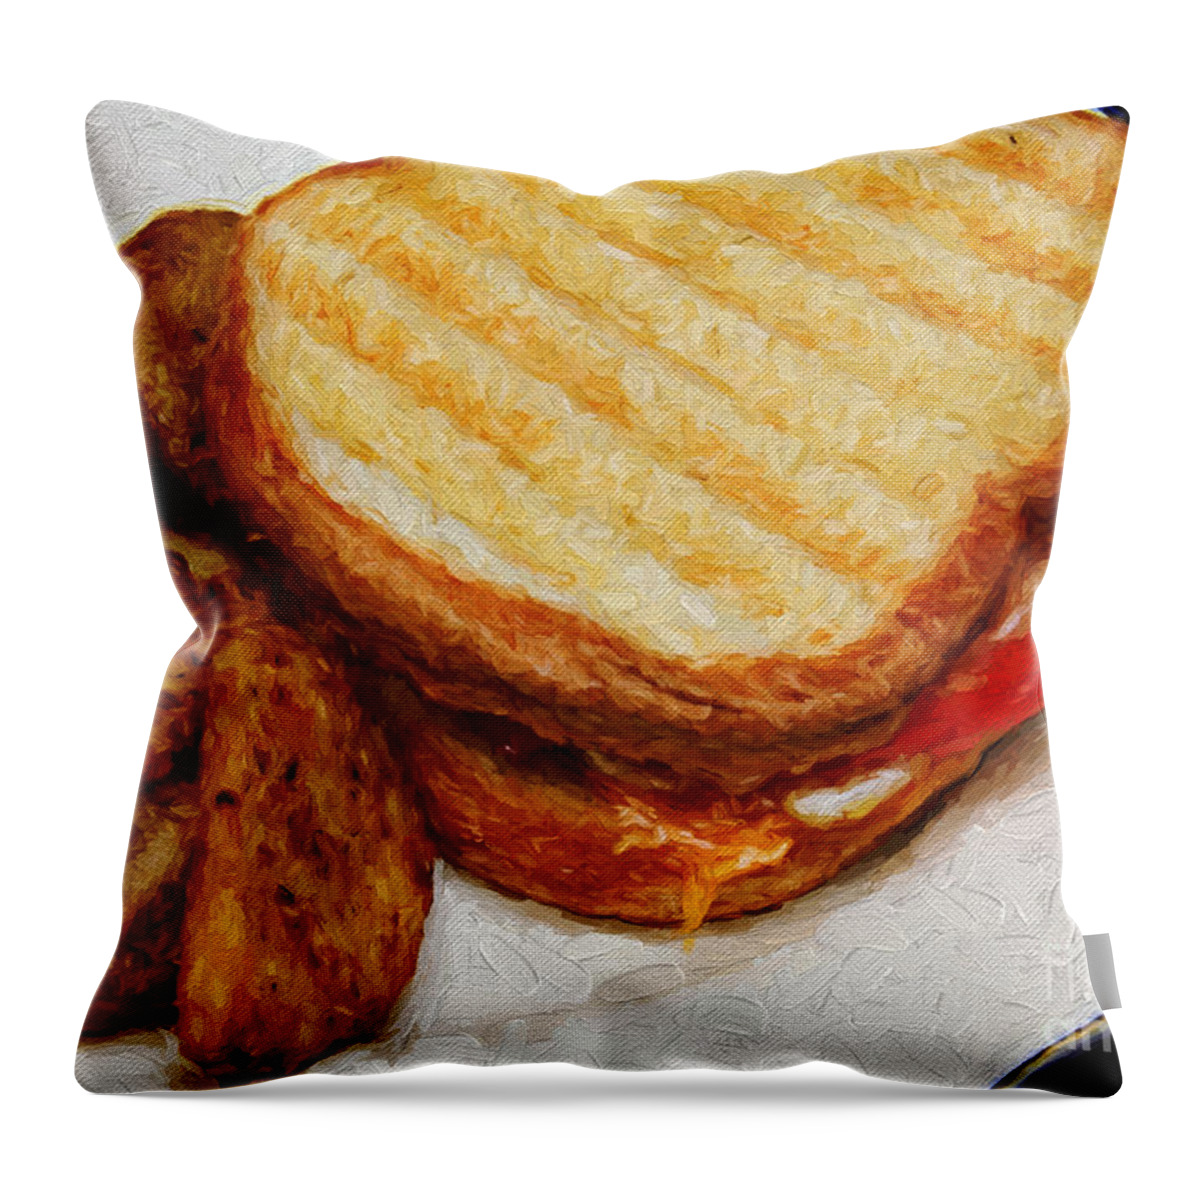 Andee Design Food Throw Pillow featuring the photograph Panini Sandwich And Potato Wedges 2 by Andee Design